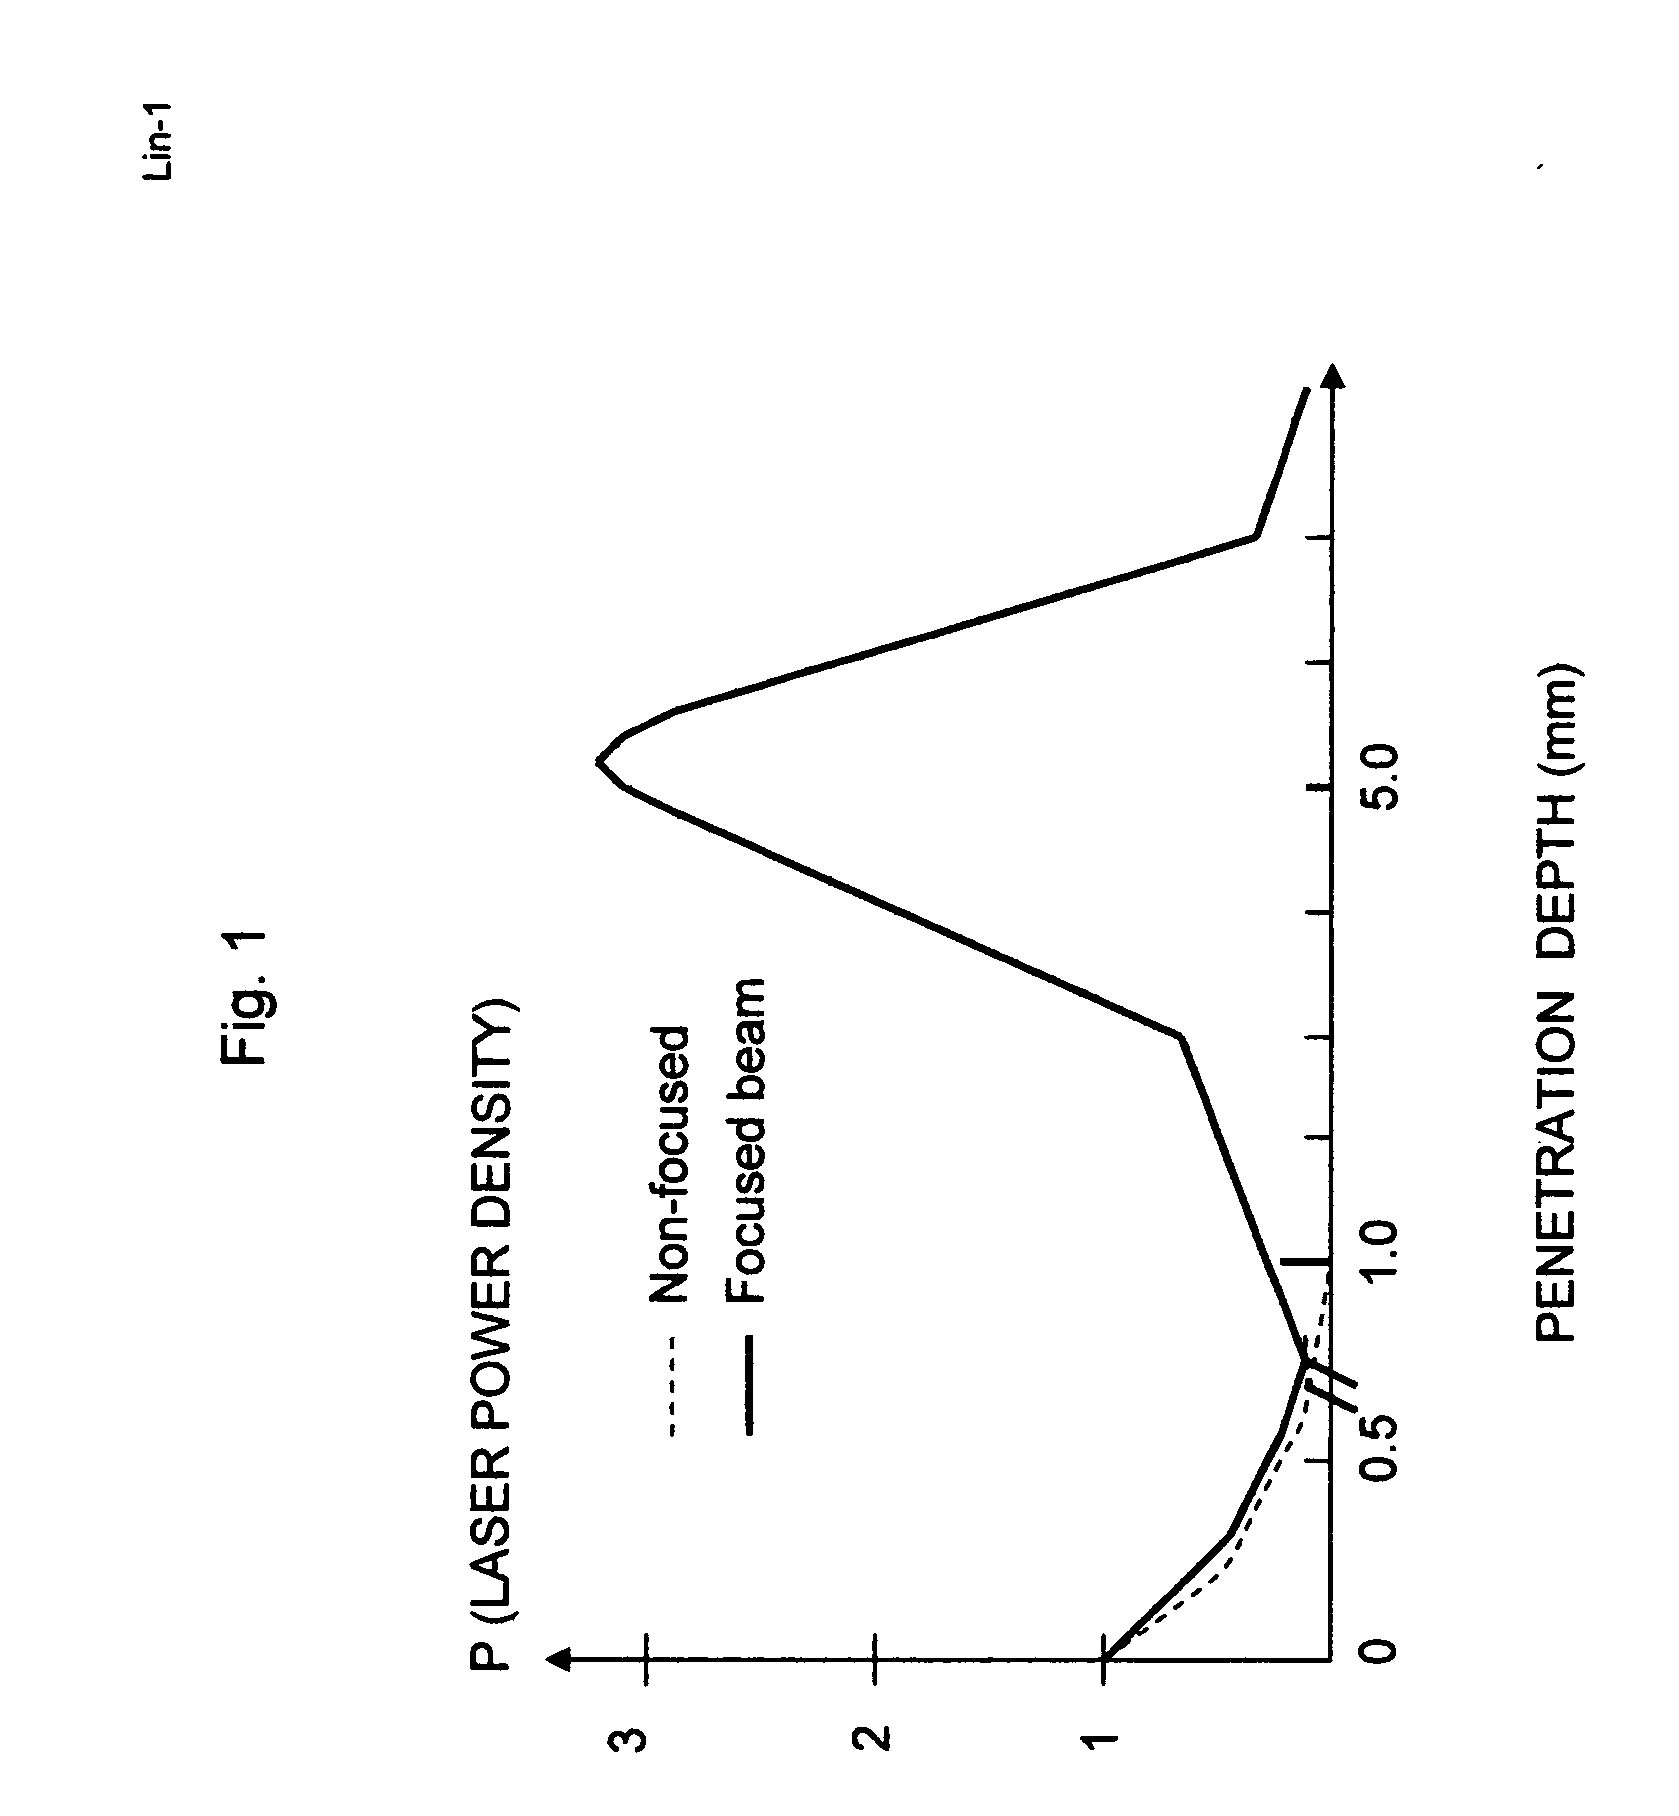 Compact laser device and method for hair removal